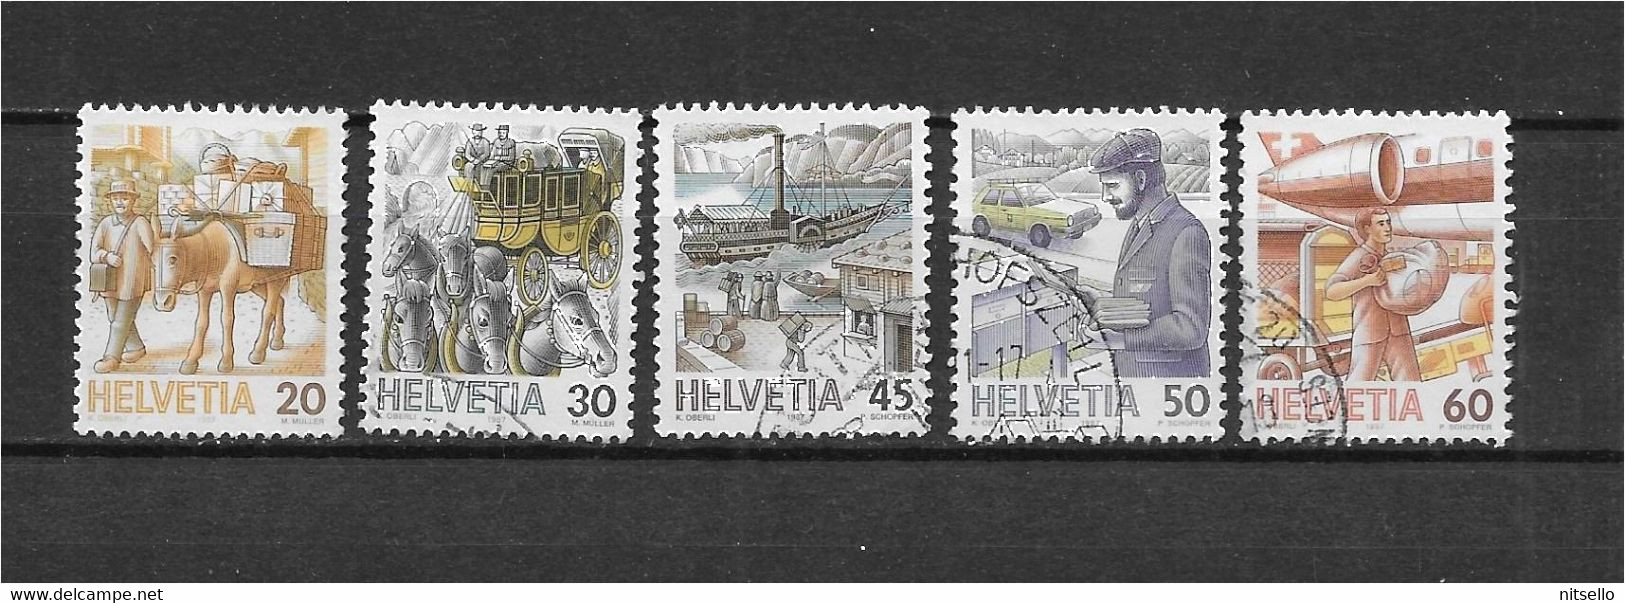 LOTE 1530A  ///  SUIZA   YVERT Nº: 1264/1268   ¡¡¡ OFERTA - LIQUIDATION - JE LIQUIDE !!! - Used Stamps